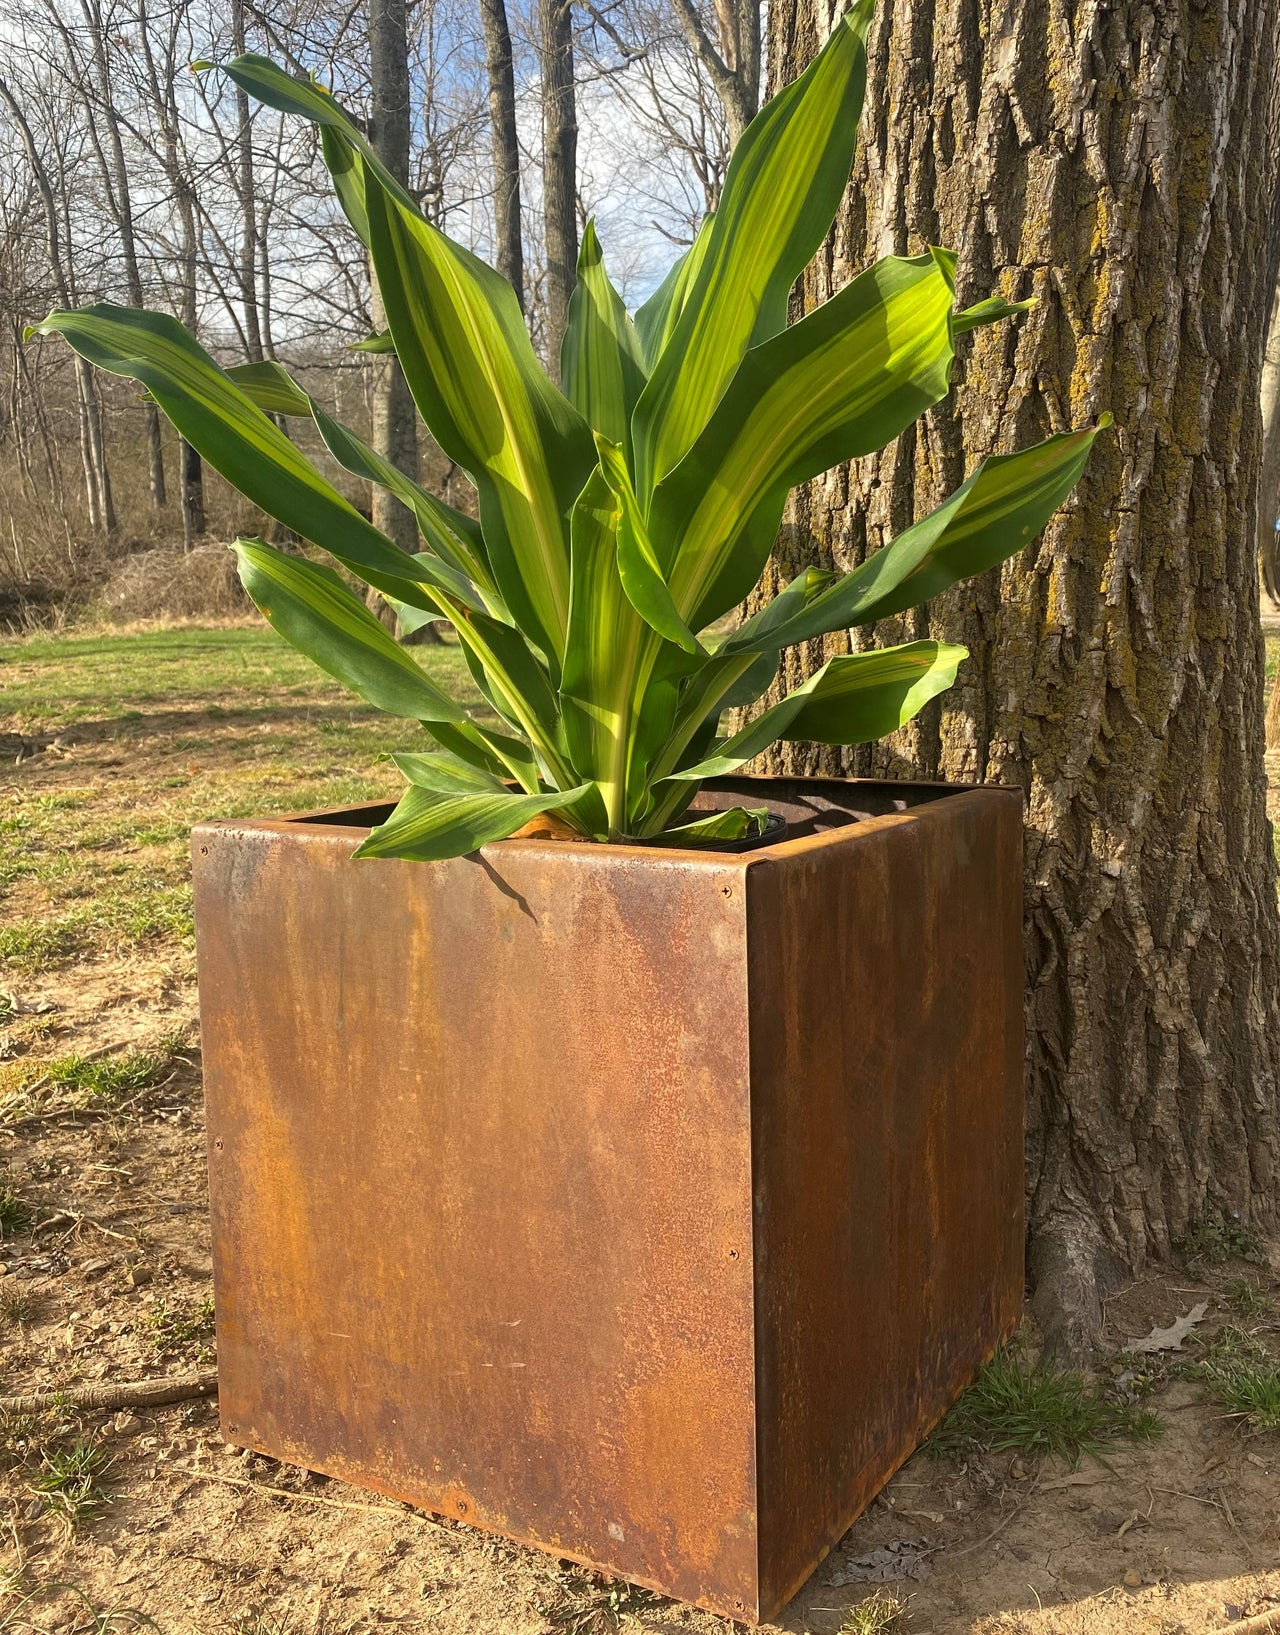 Wholesale Square Metal Planter - 3 Sizes 10" 16" & 22" Large Planter - Planter Pot - Raw Steel With Natural Rusty Patina - Minimalist